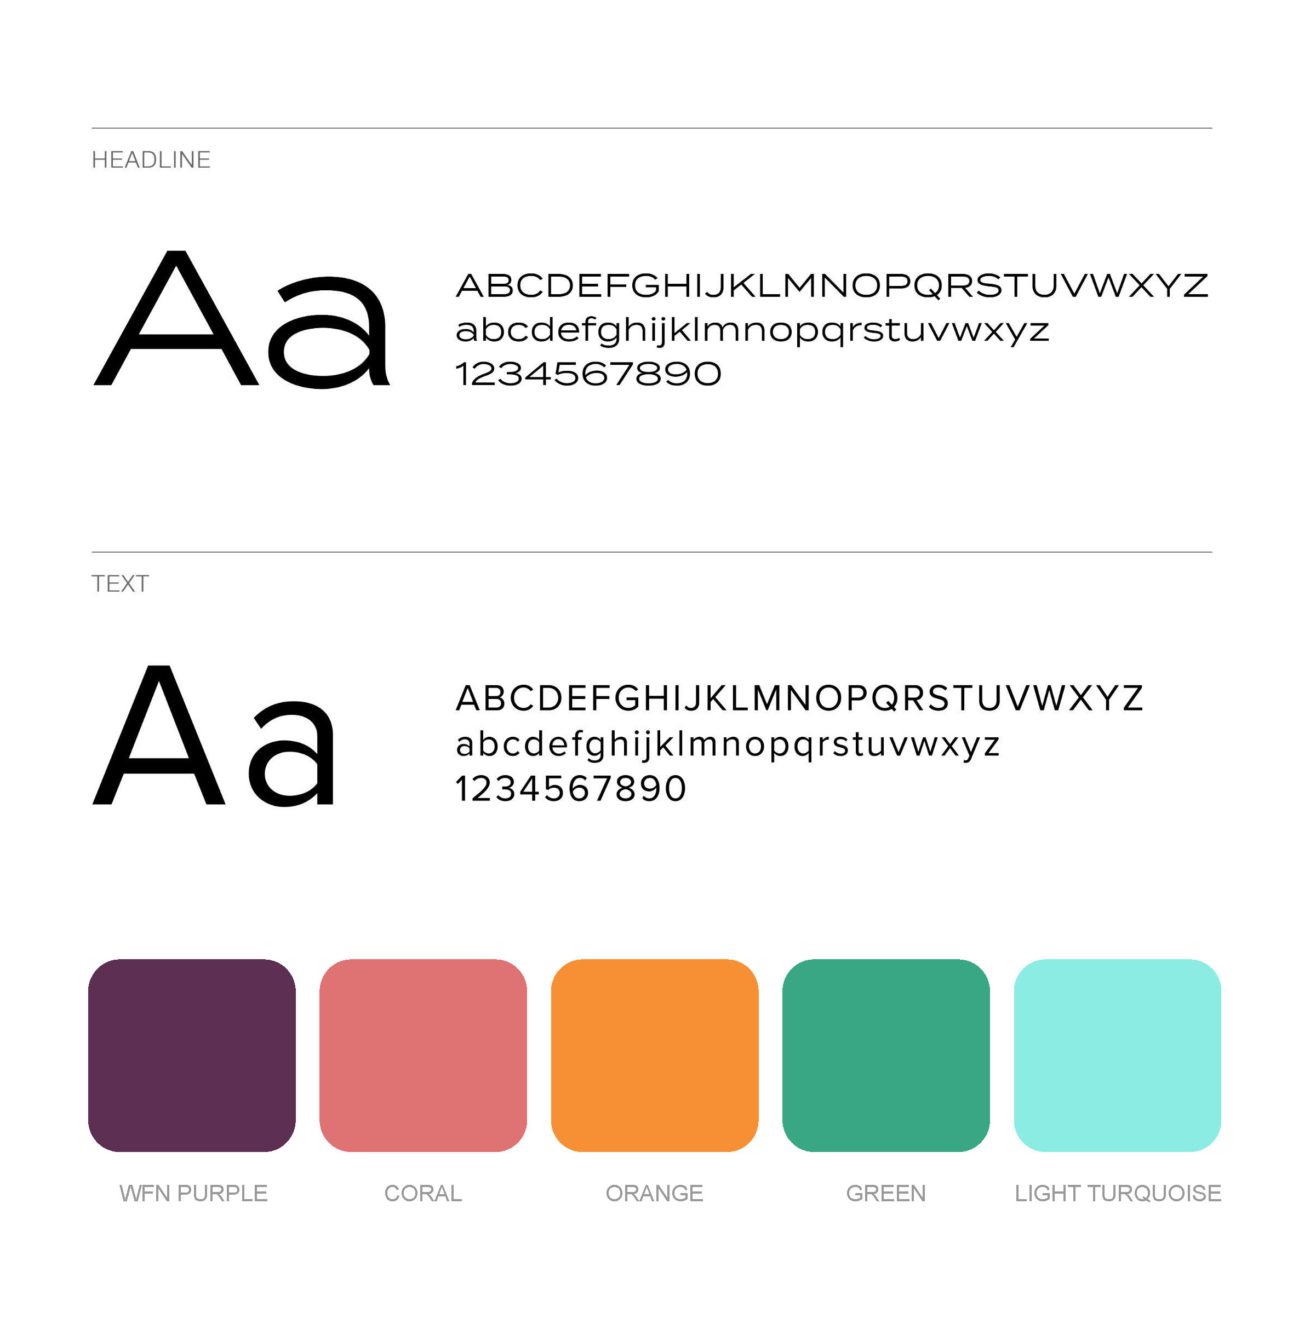 Typography and color pallet.